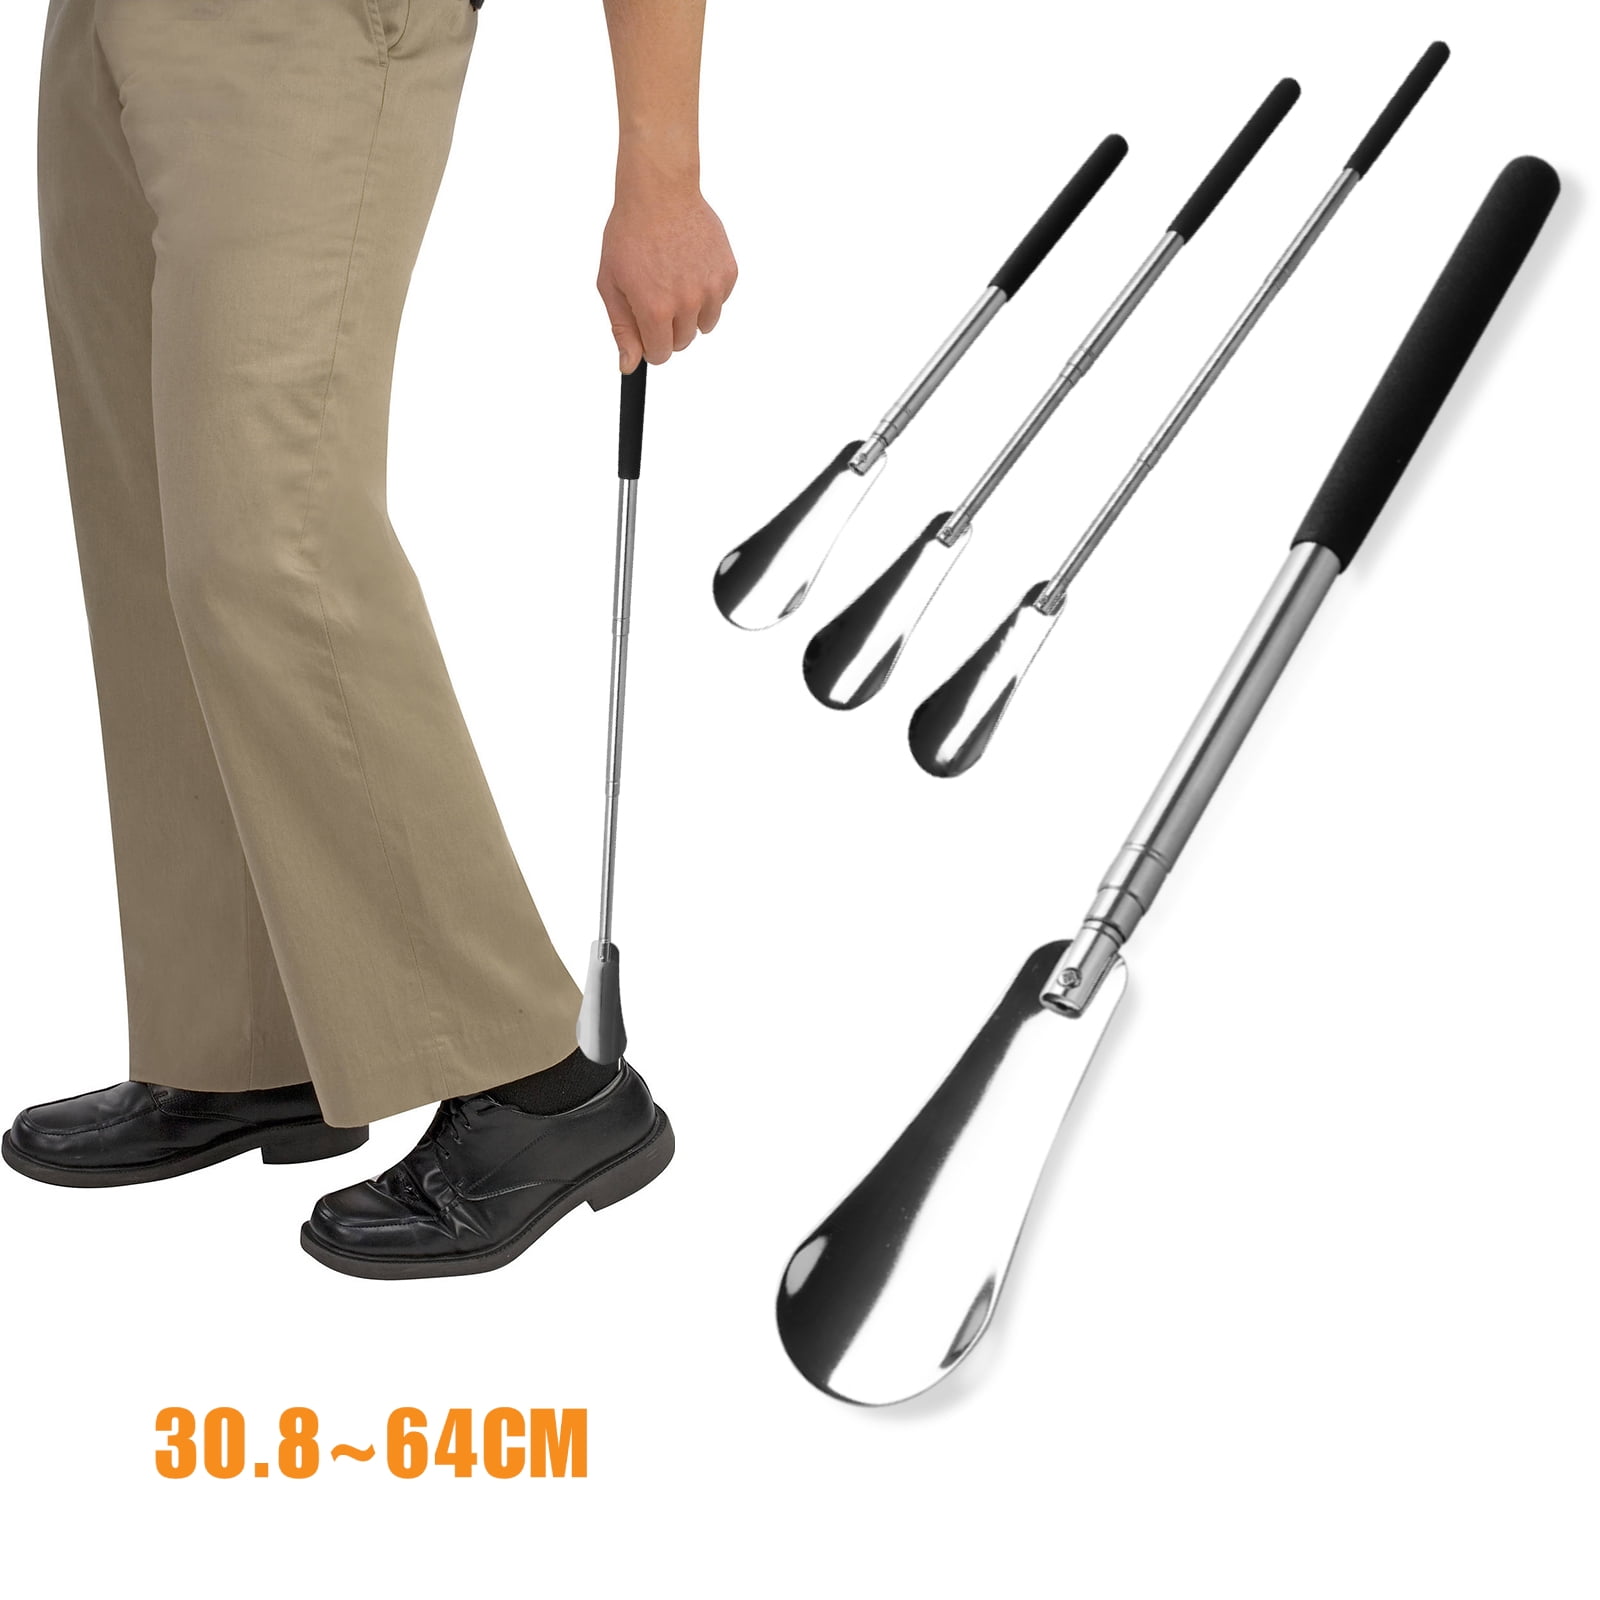 Pregnancy & People with Back Pain Shoe Horn Long Handled Made Professional Adjustable Handle Shoe By Stainless Steel Designed for Seniors 